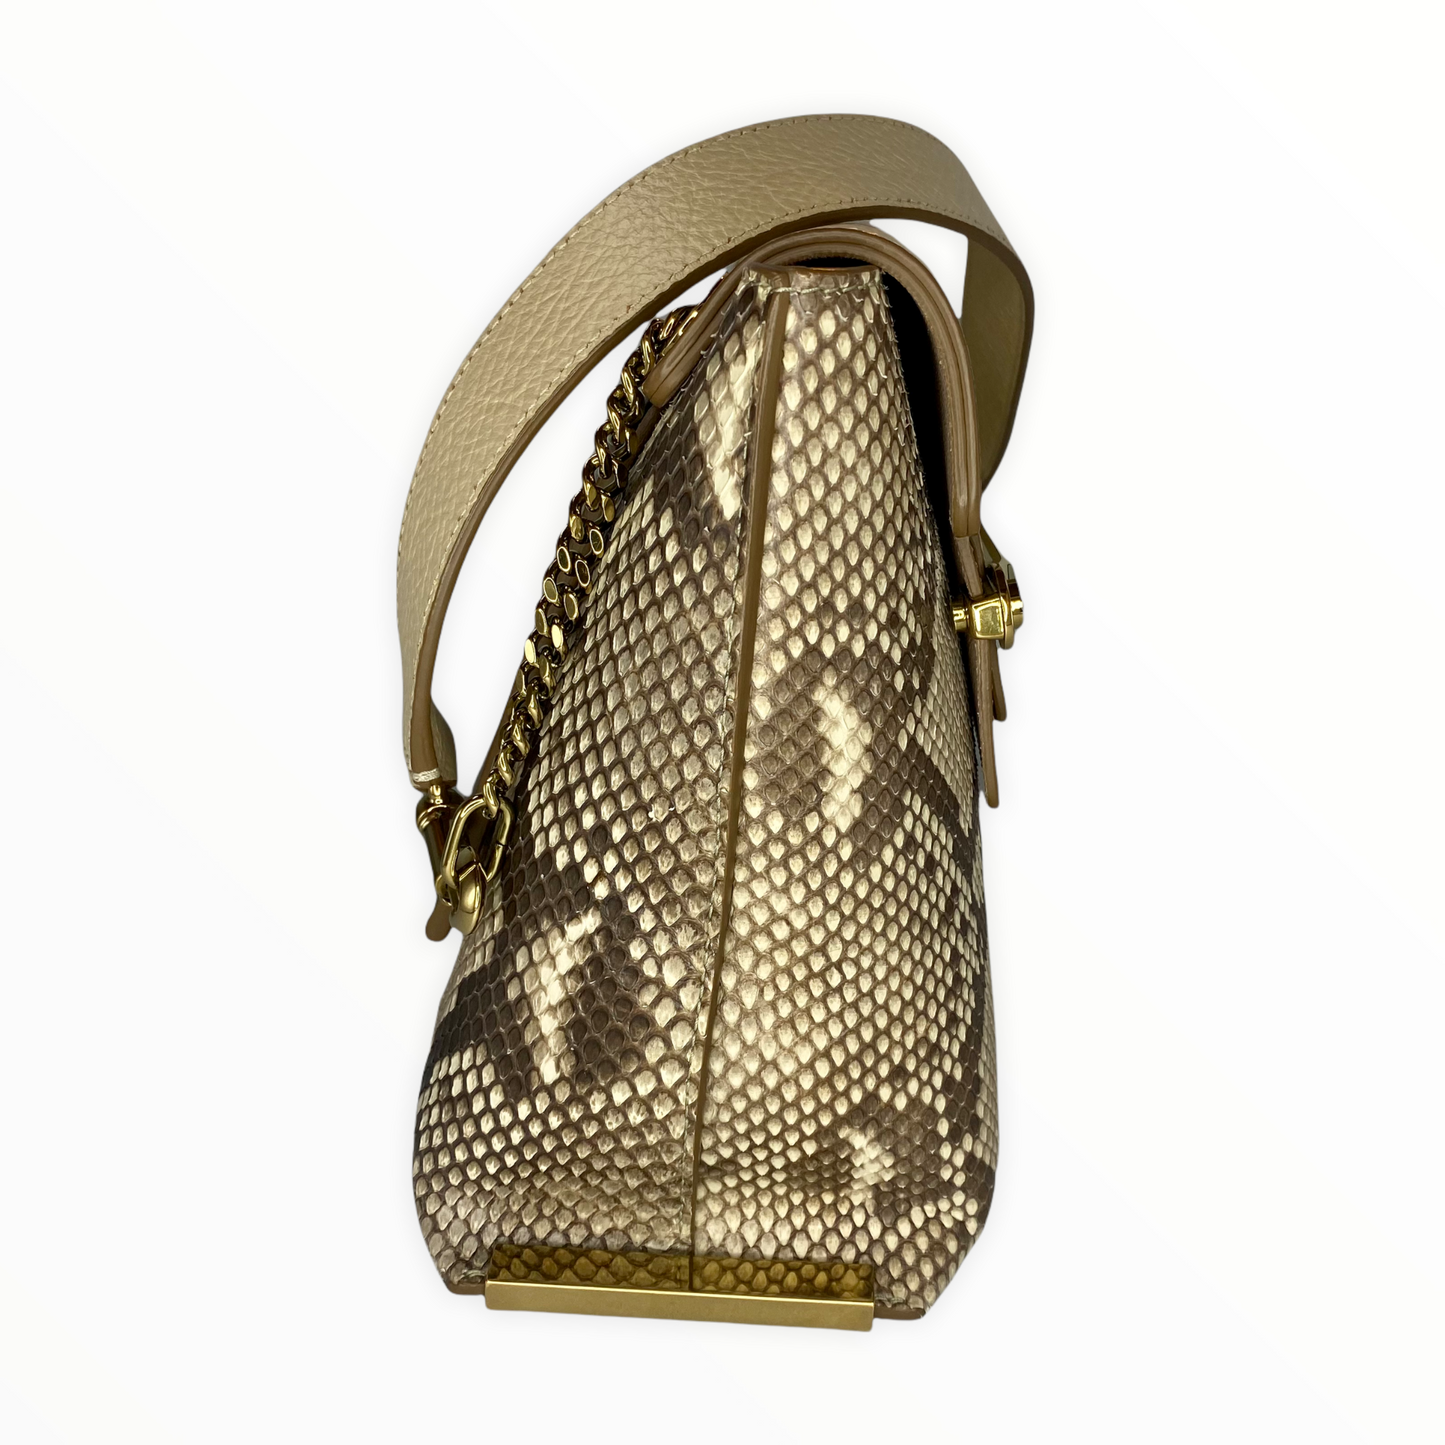 Lysis vintage Chloé Clare bag in python and leather - 2010s